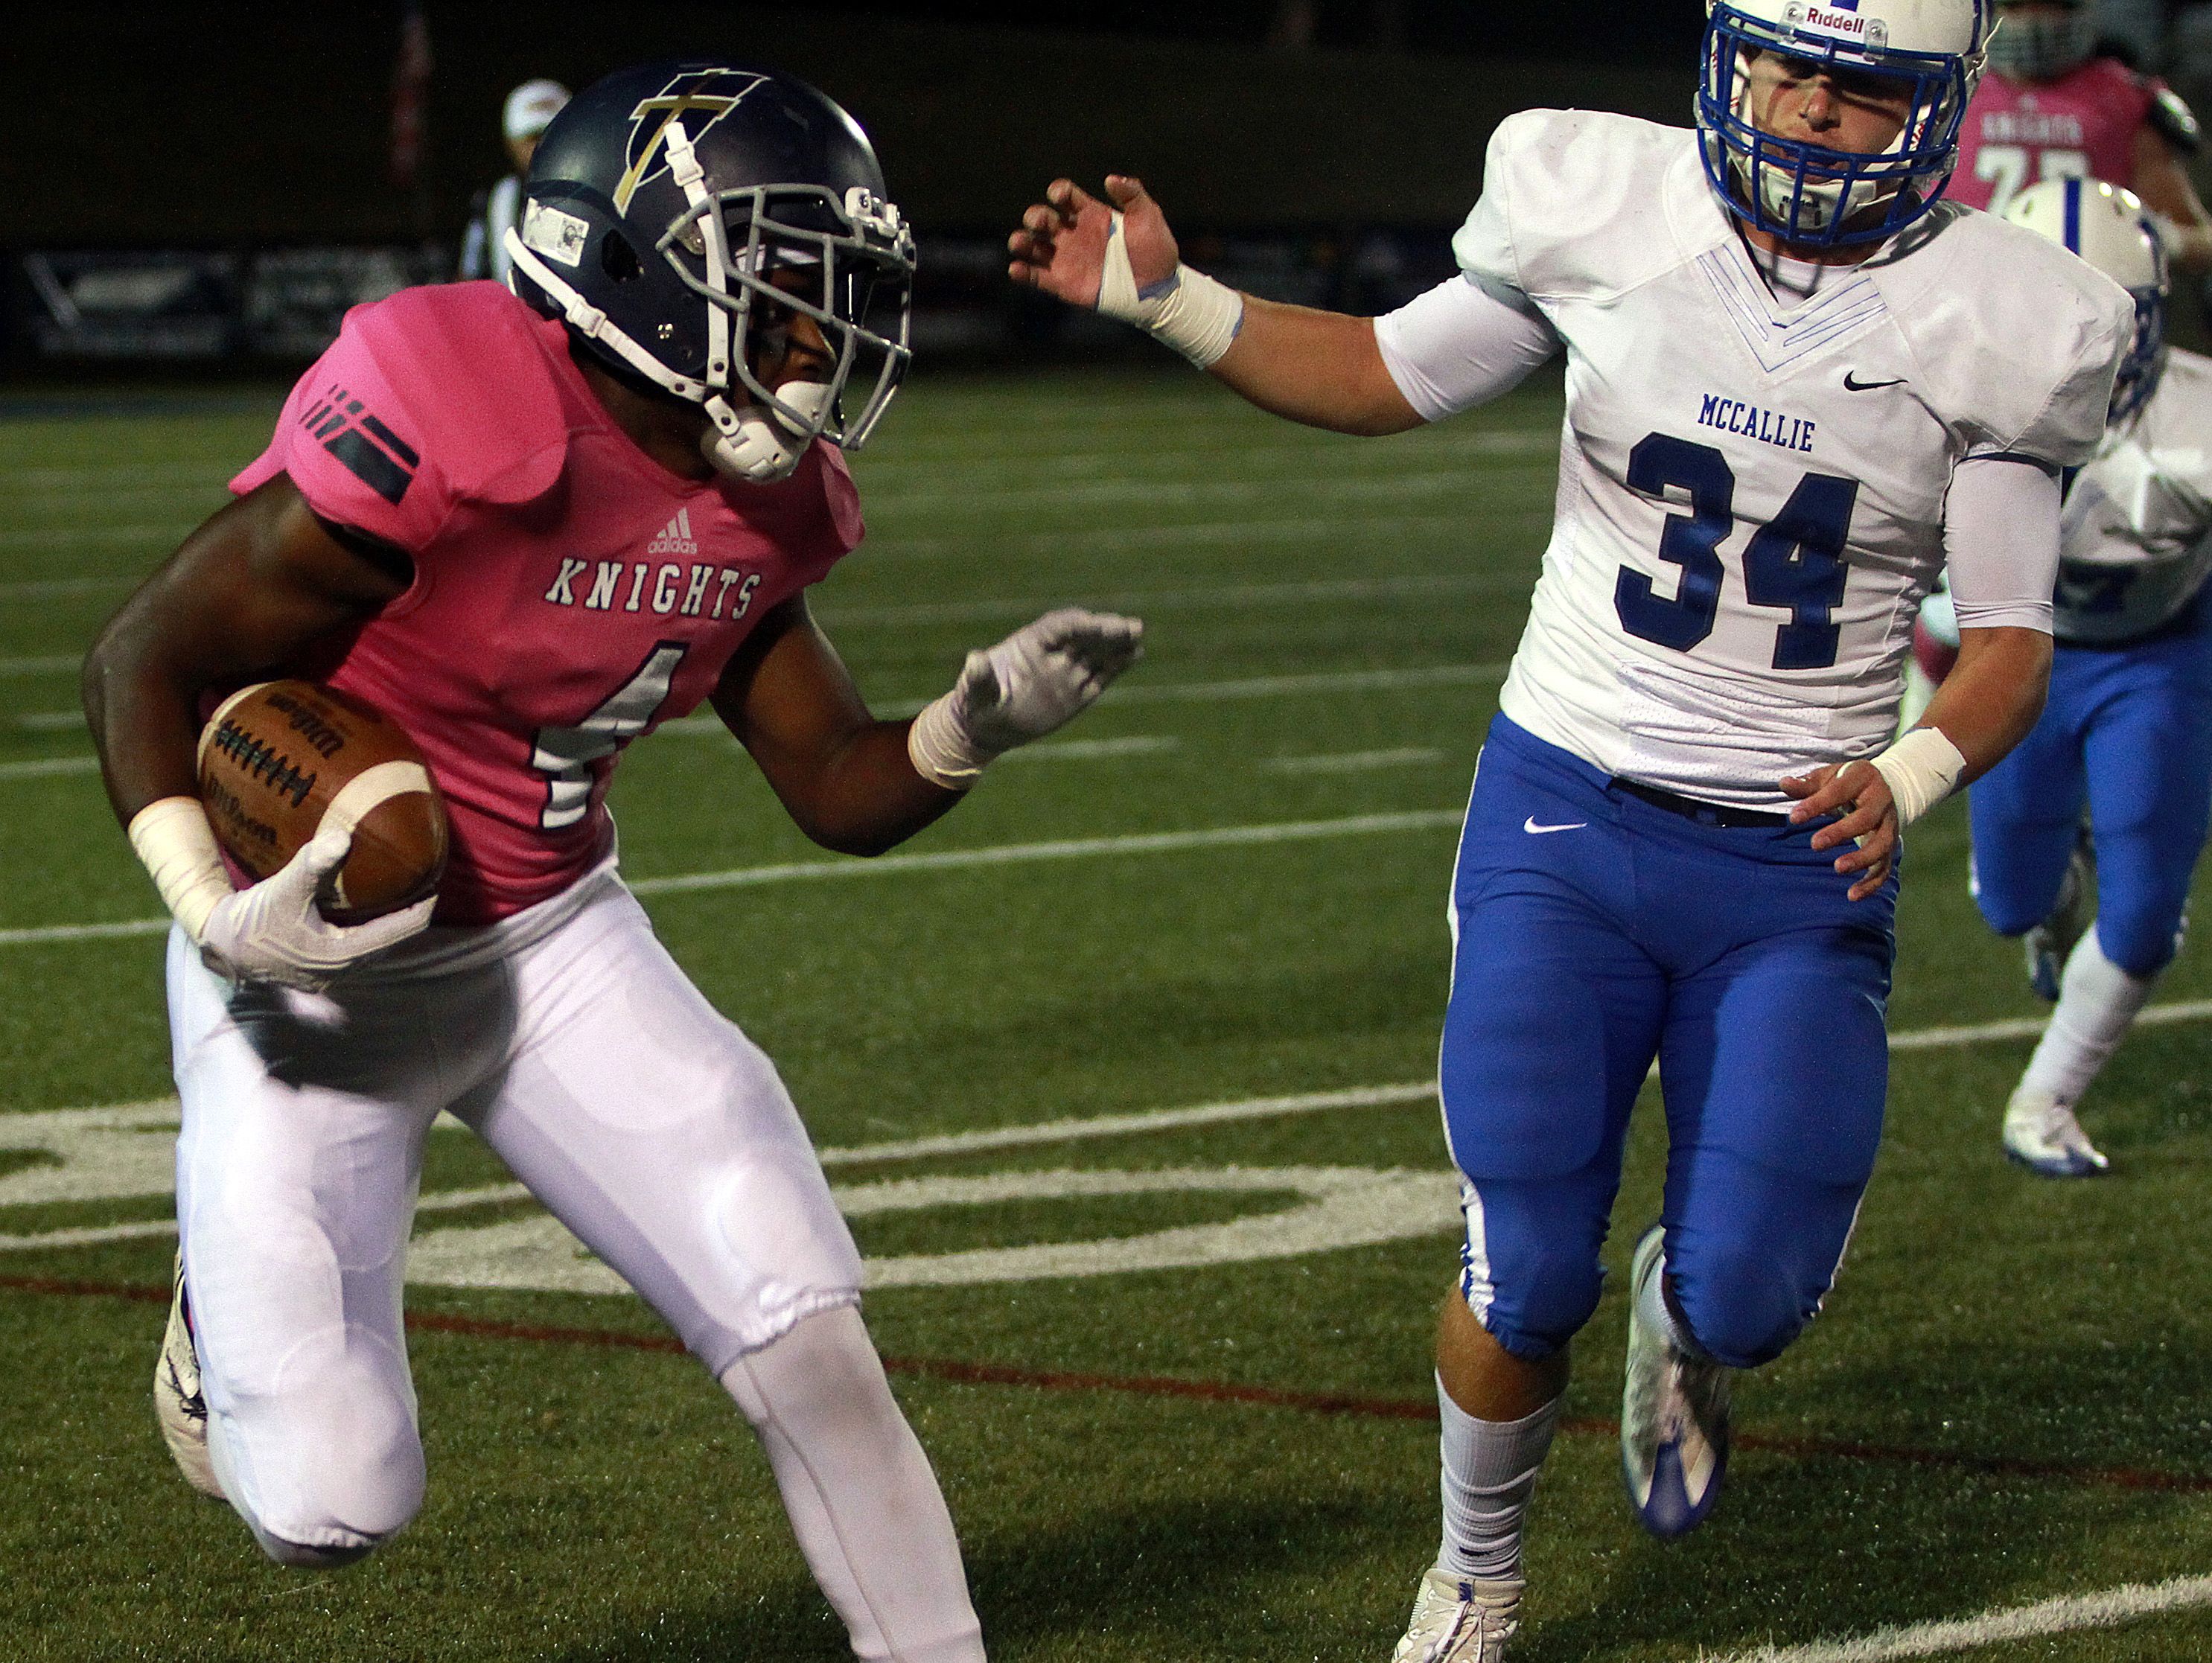 Pope John Paul II's Jamaal Thompson rushes as McCallie's Andrew Presley pursues during a contest earlier this season.